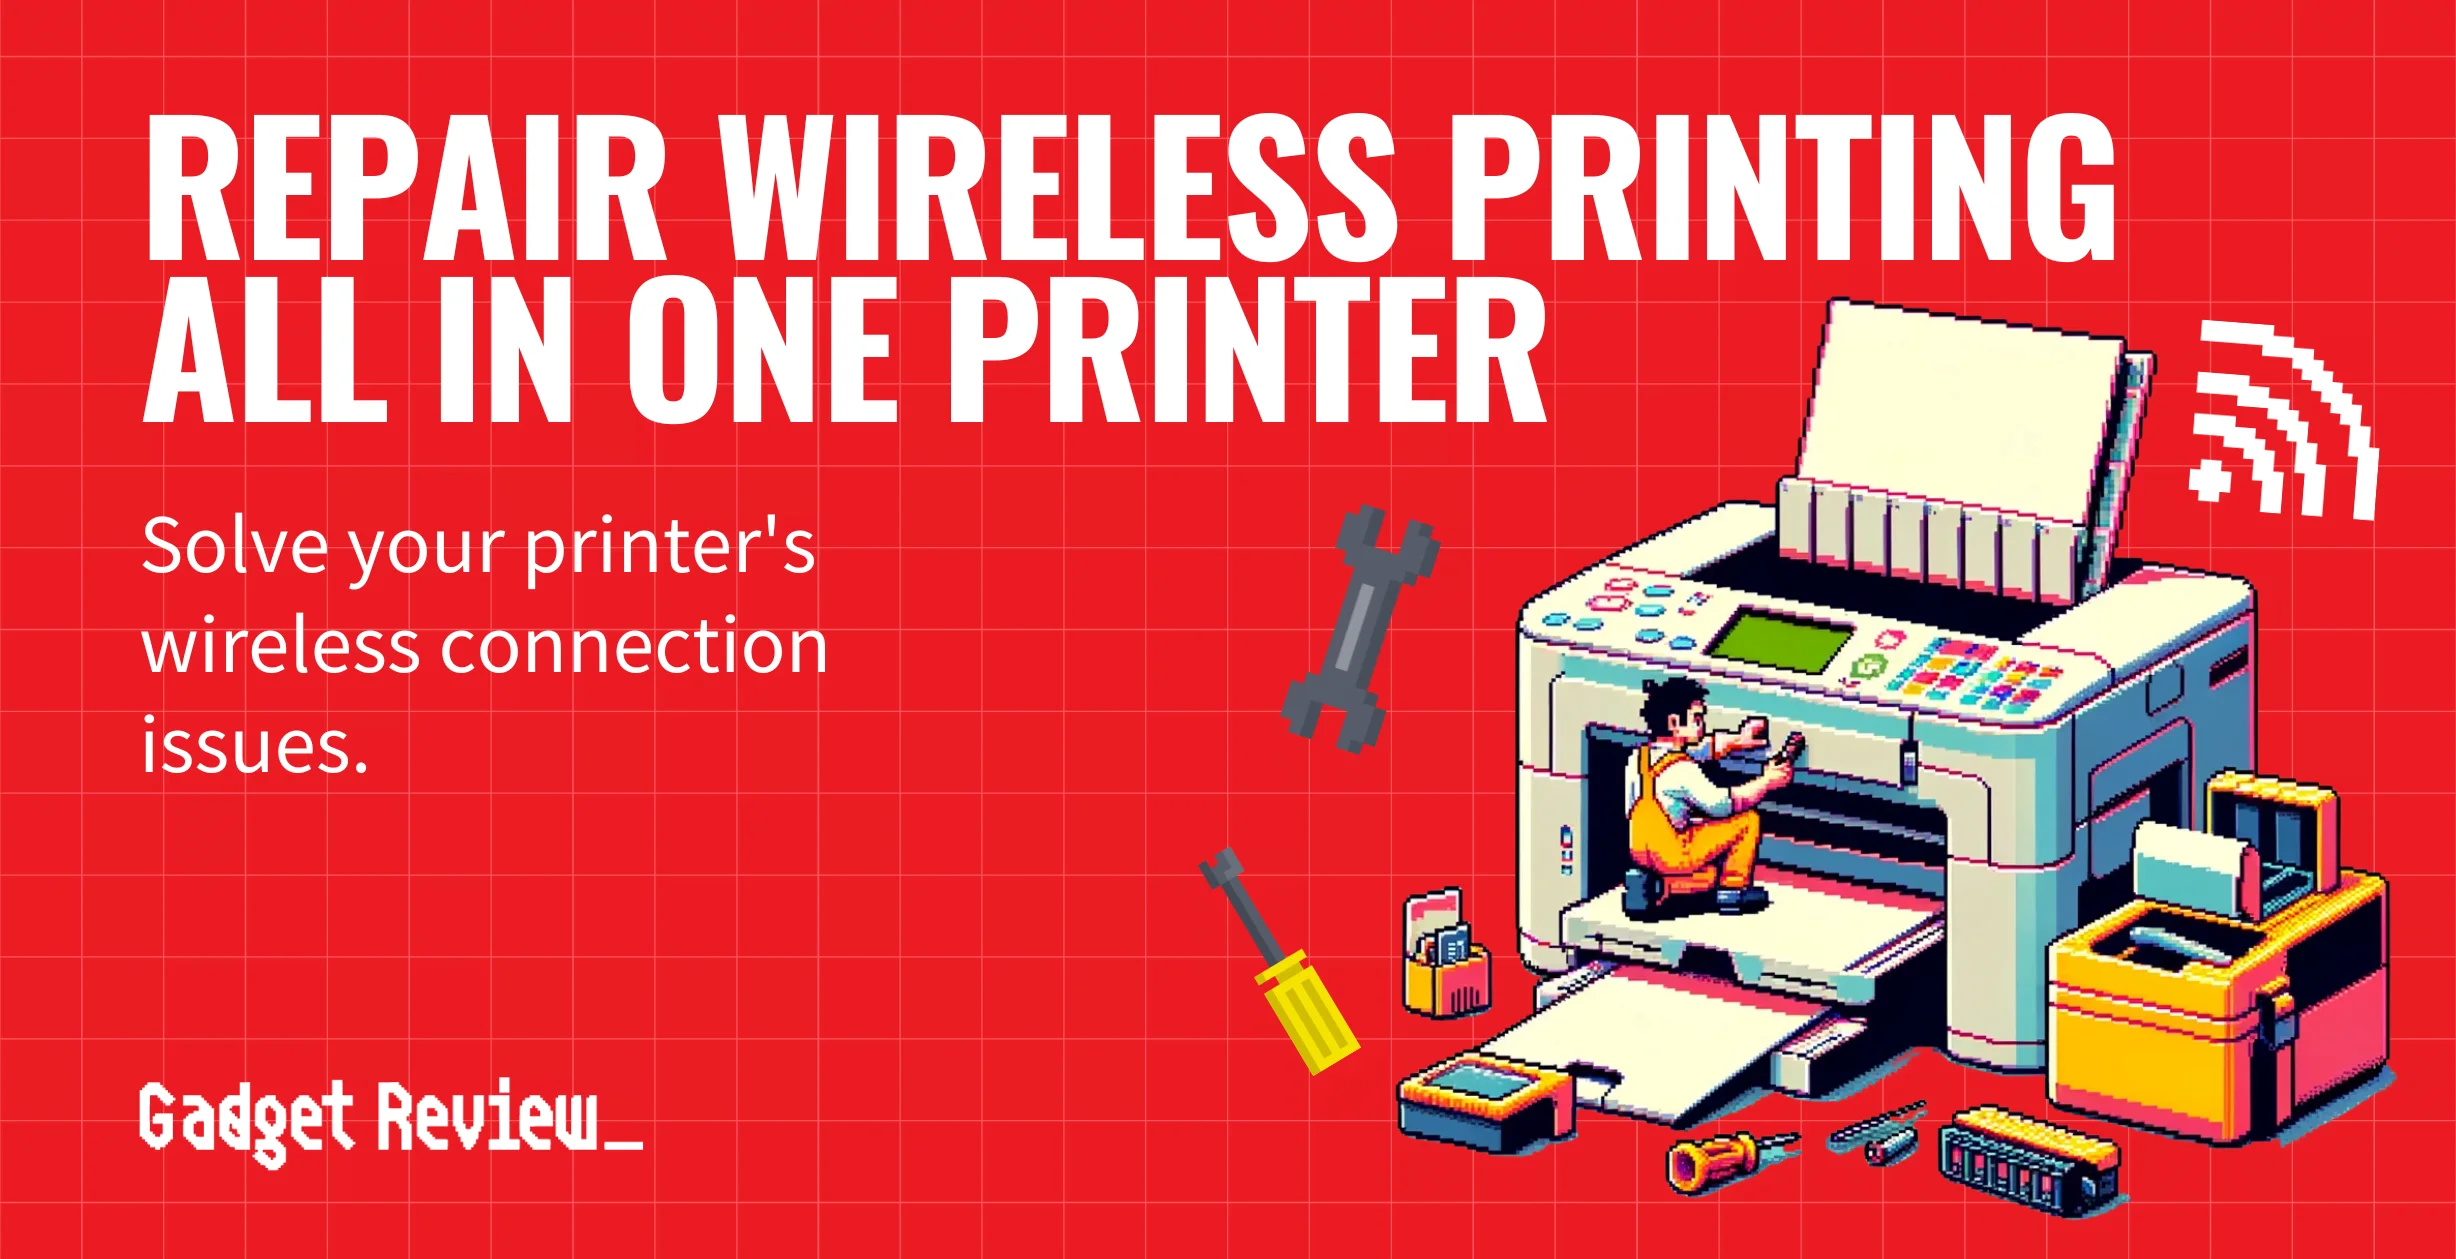 Repair Wireless Printing on an All-In-One Printer